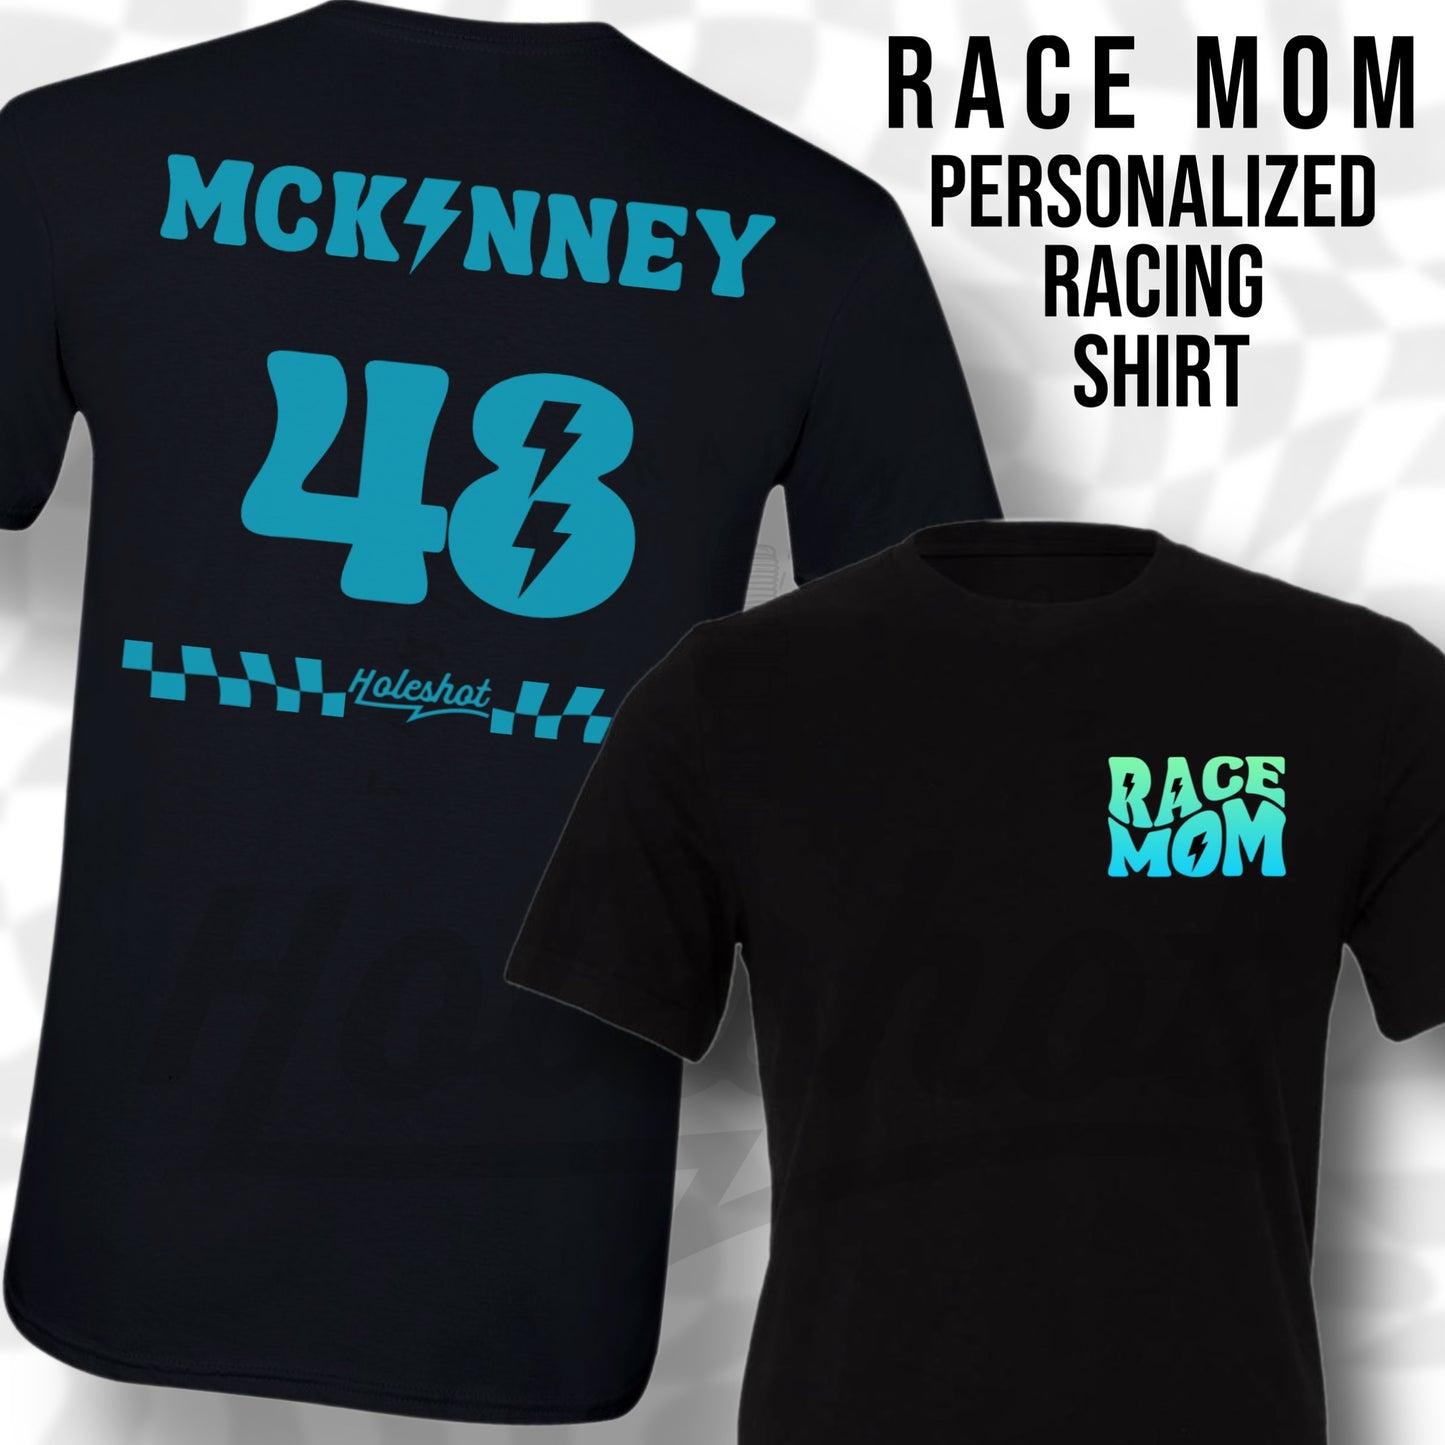 Personalized Race Mom Shirt